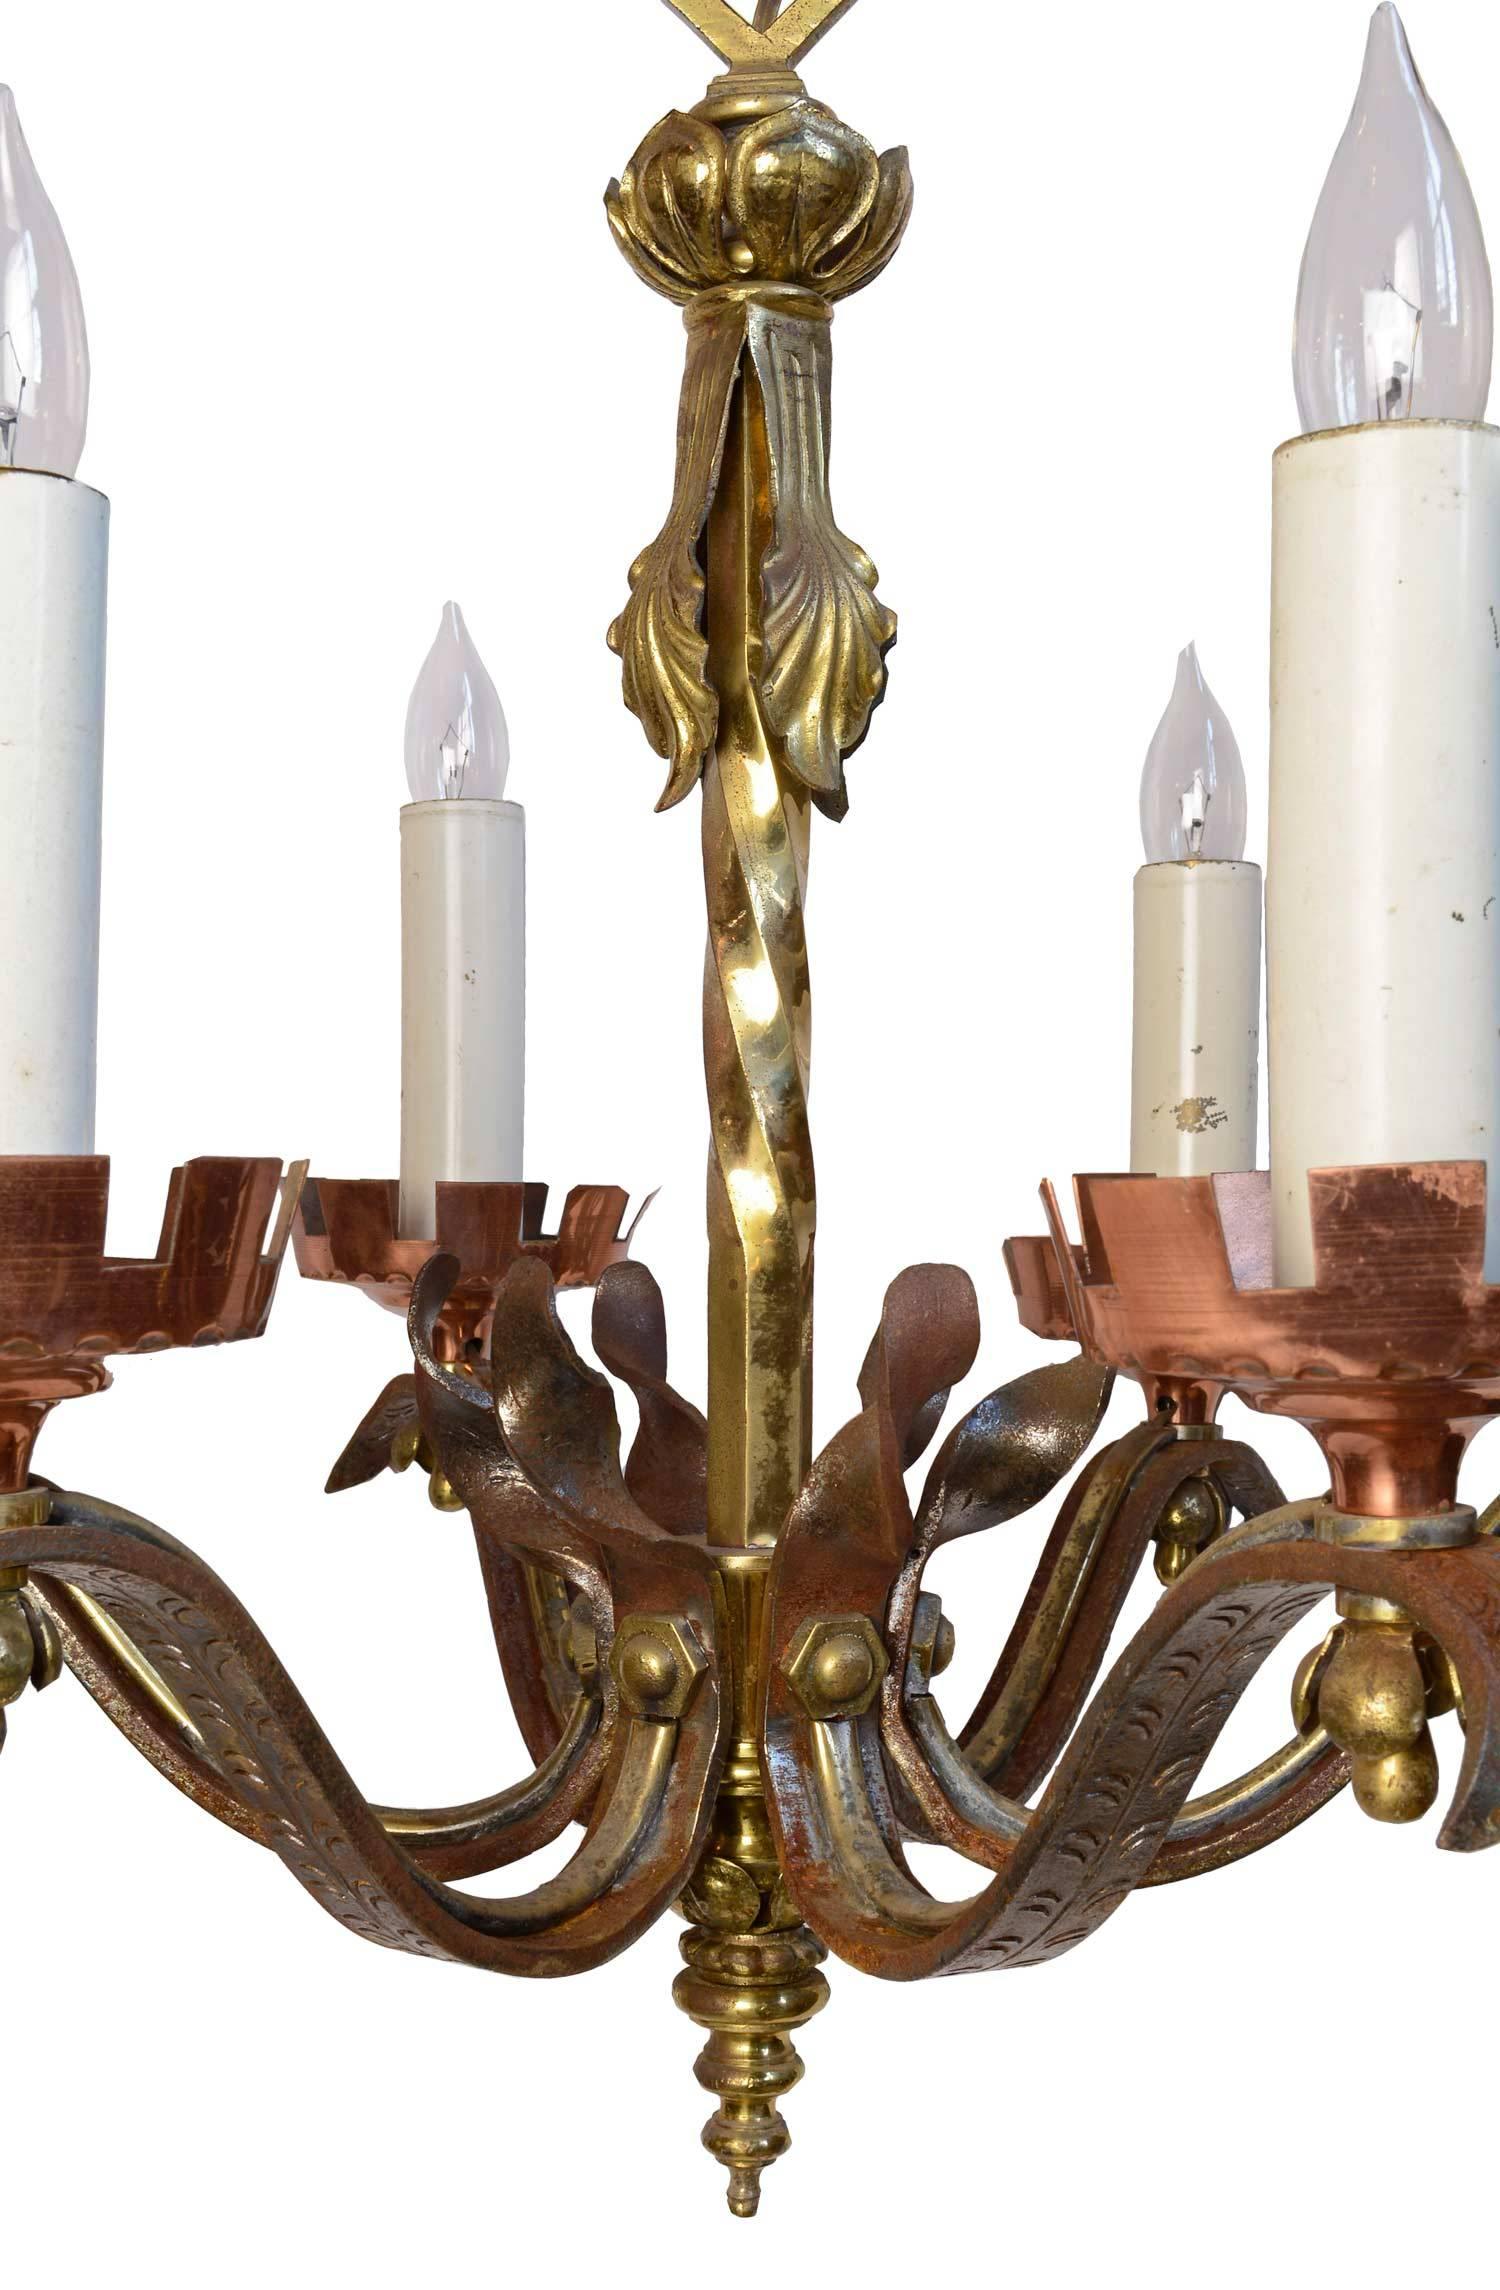 Cast Six Candle Copper, Brass and Iron Gothic Revival Chandelier For Sale